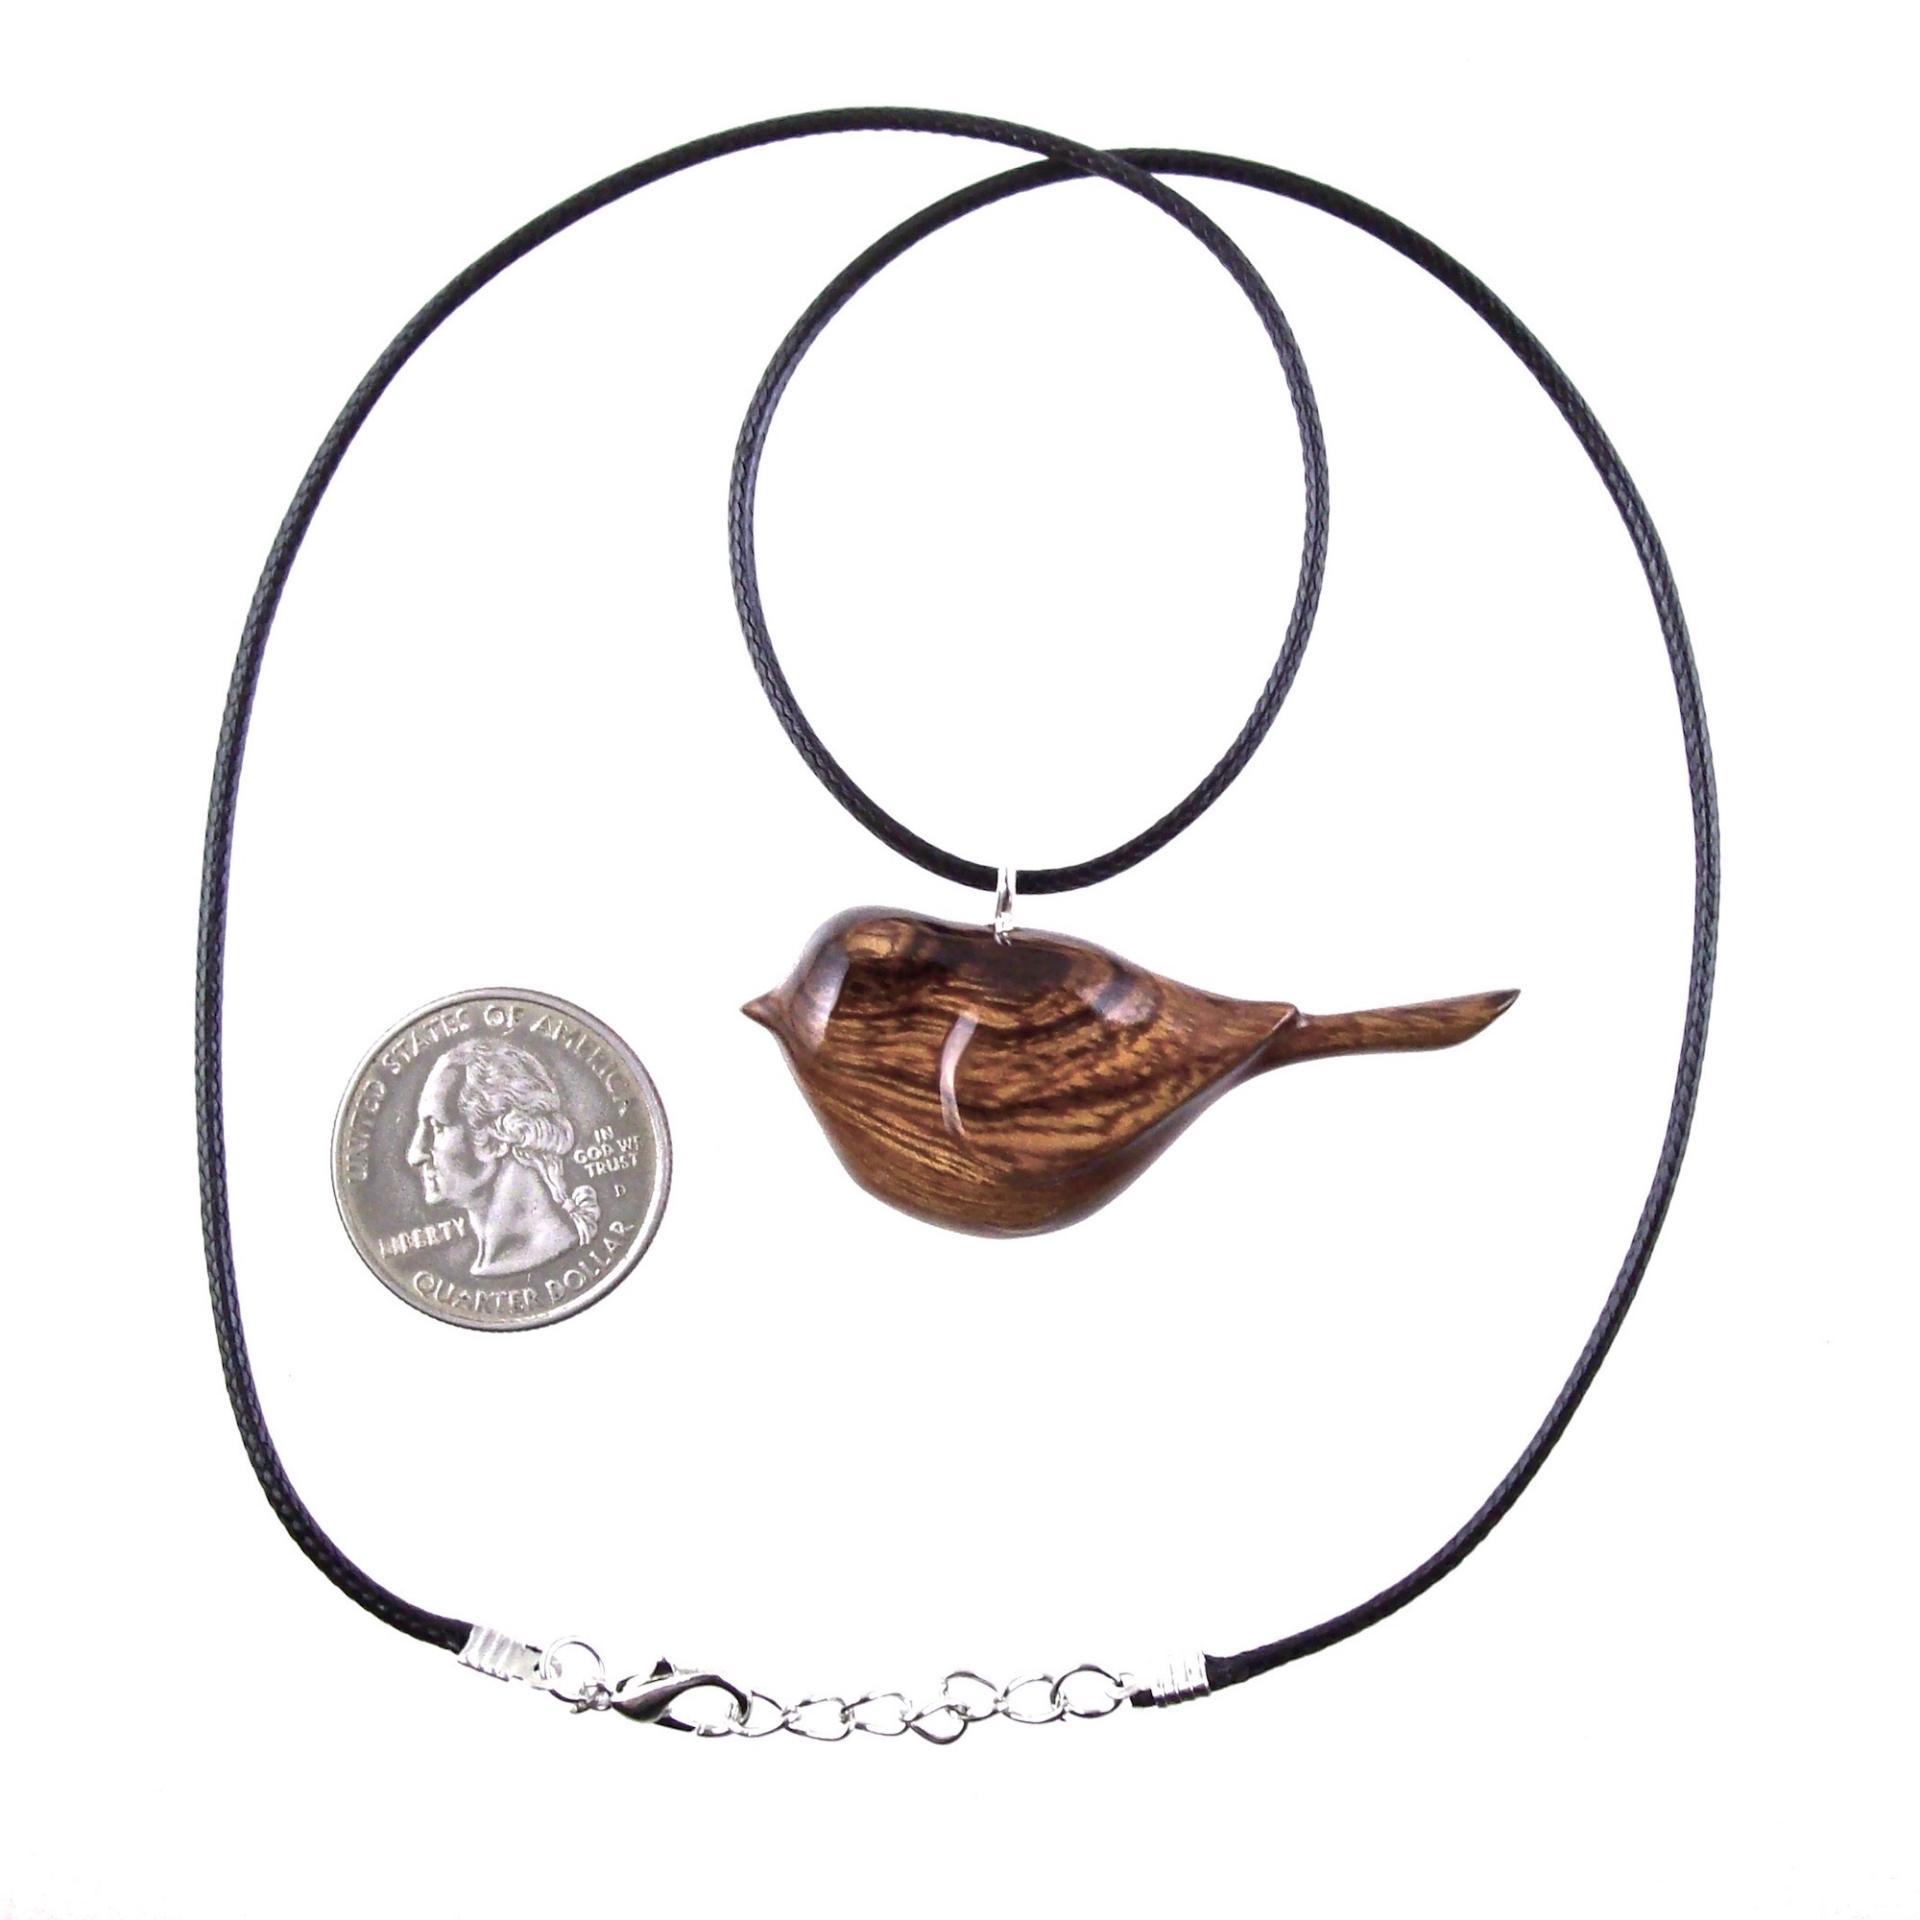 Chickadee Necklace, Hand Carved Wooden Bird Pendant, Wood Bird Jewelry, One of a Kind Gift for Her